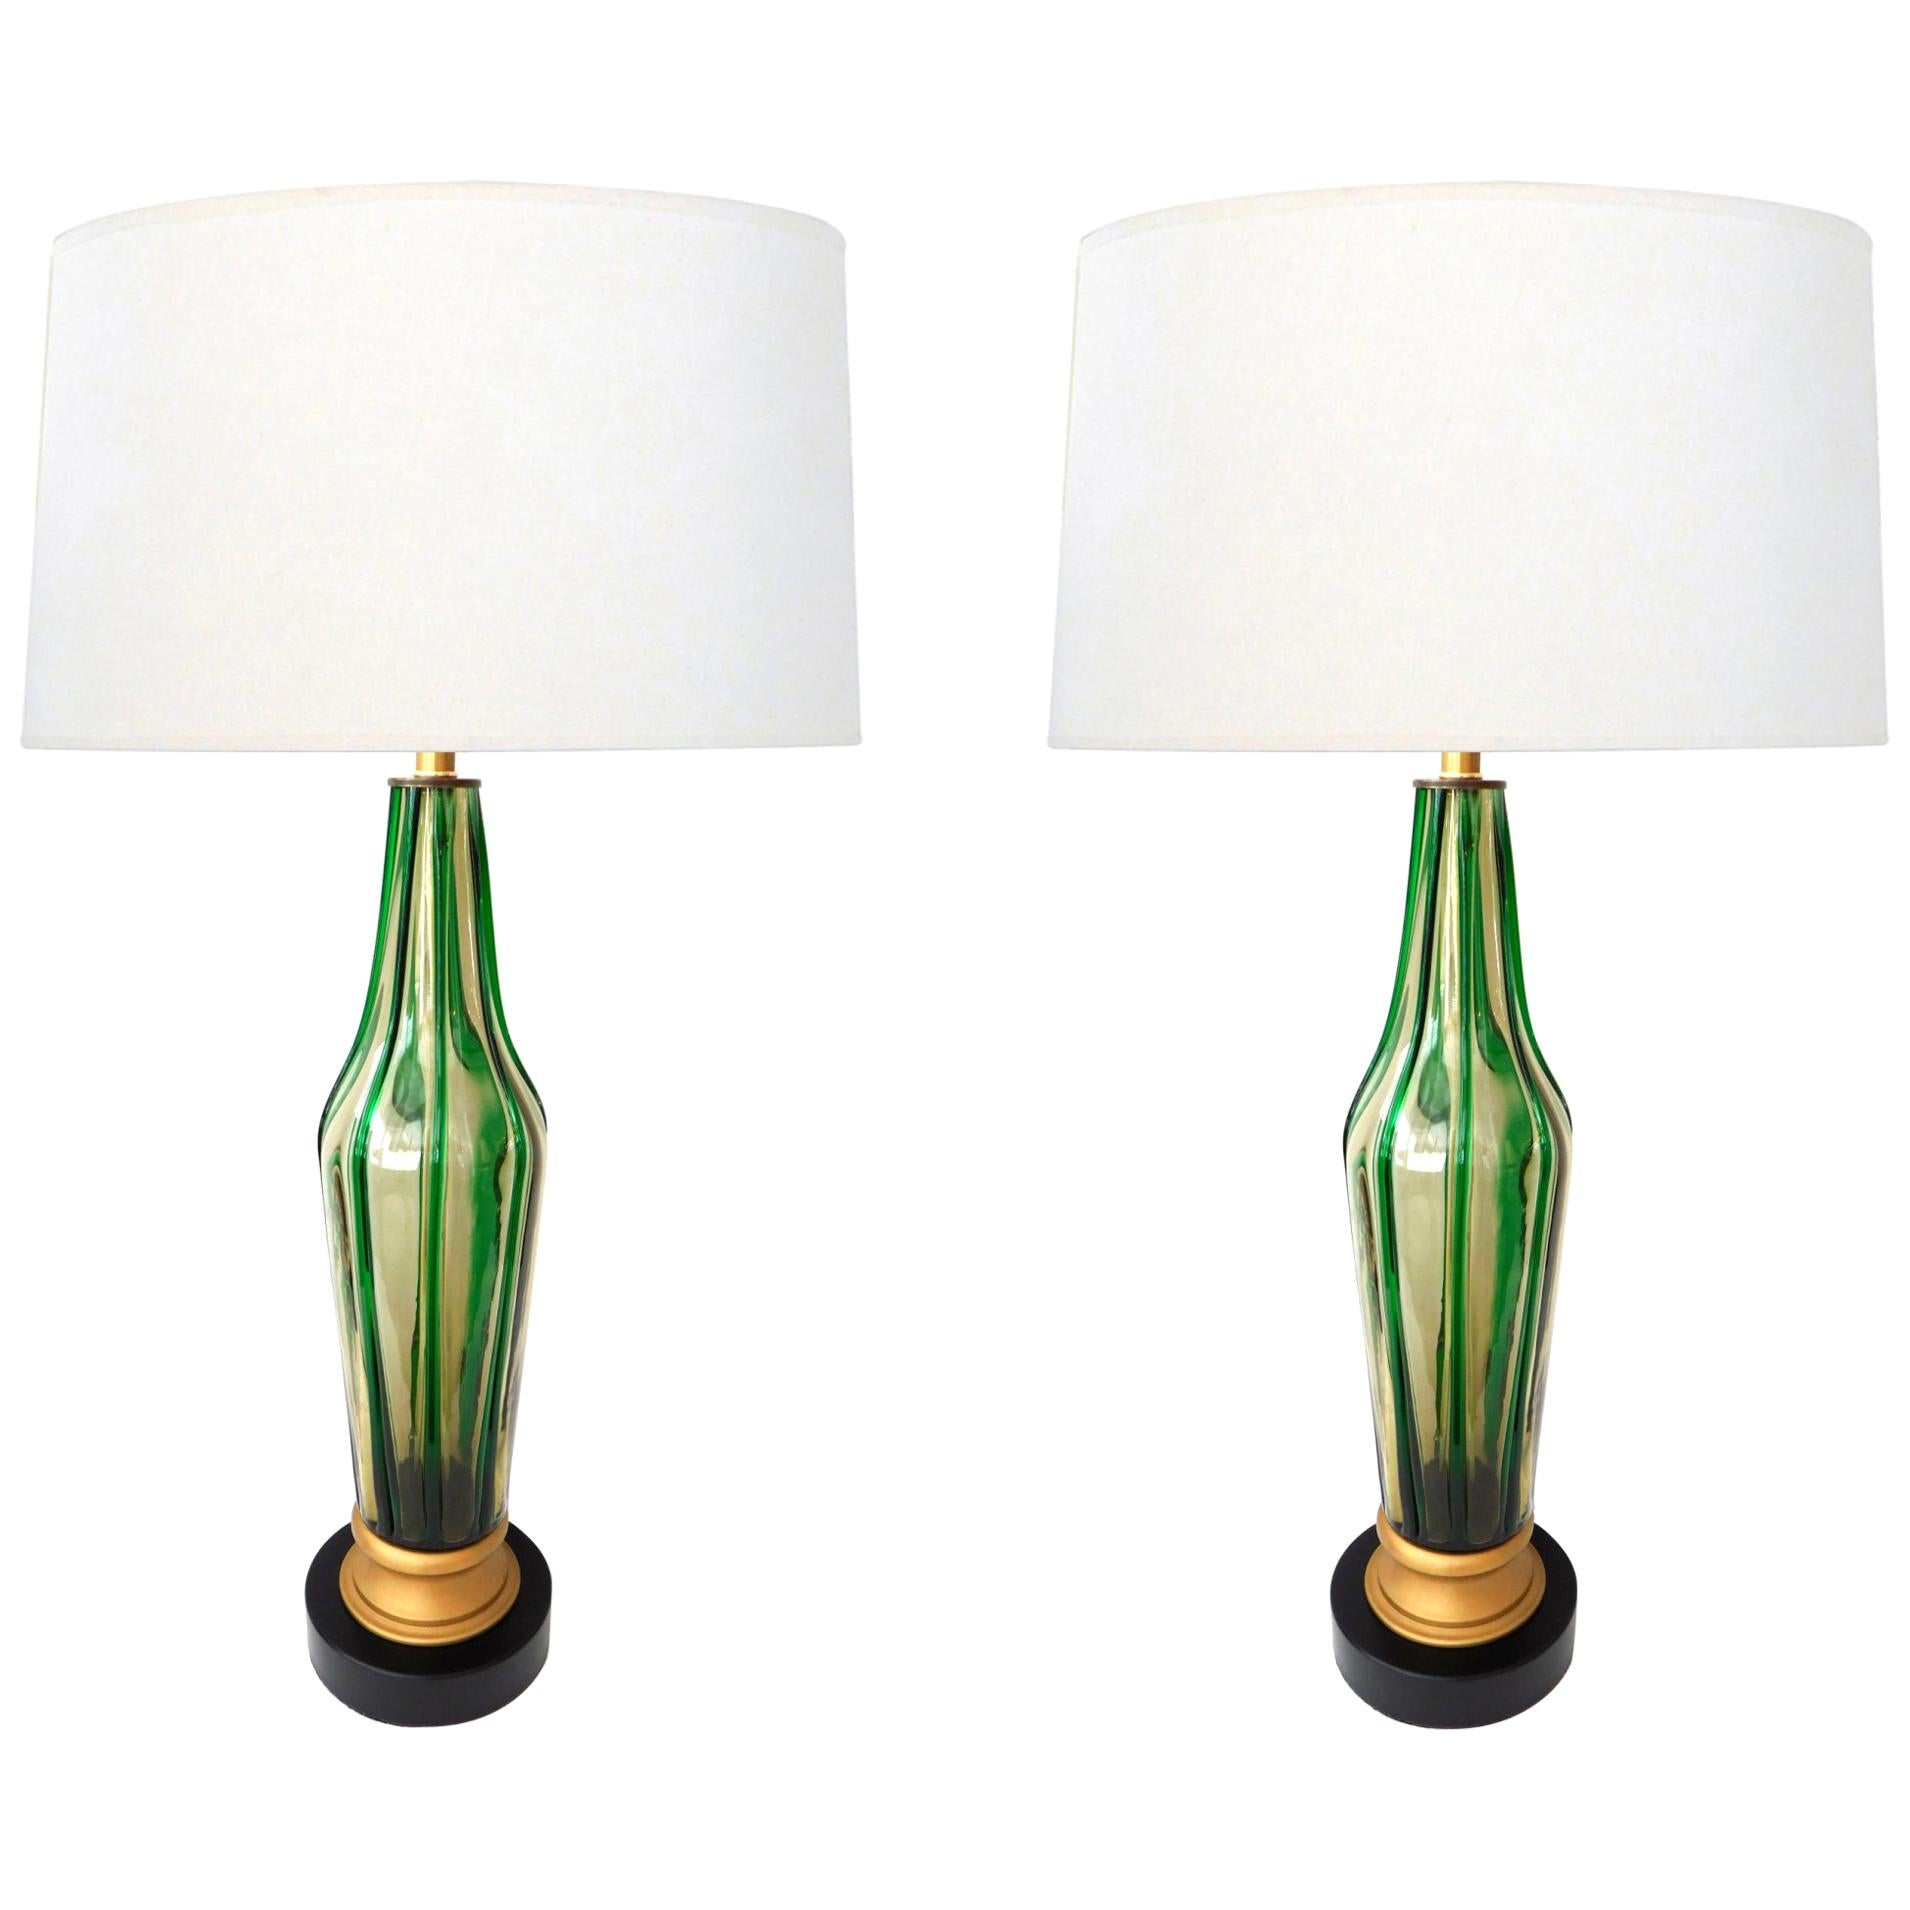 Pair of Murano 1960s Art Glass Lamps with Applied Green Decoration